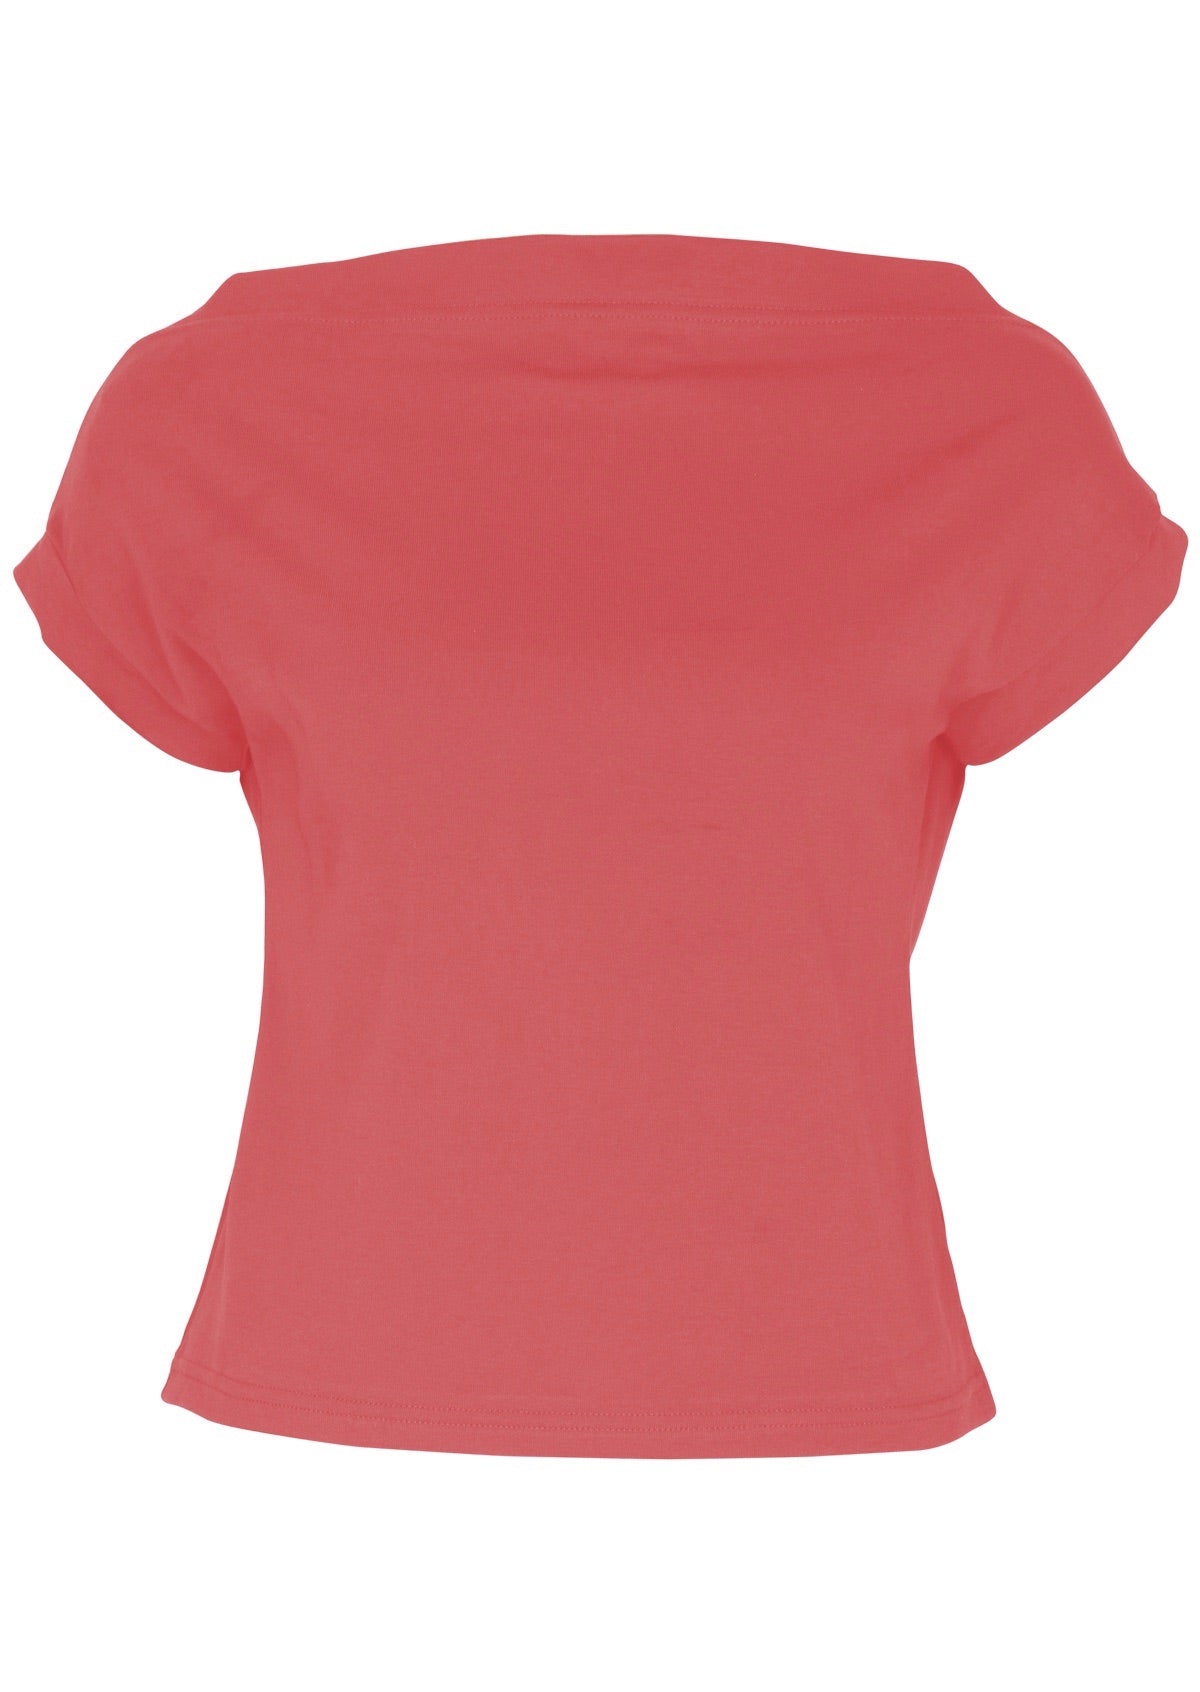 Front view women's wide neck mod pink stretch rayon boat neck top